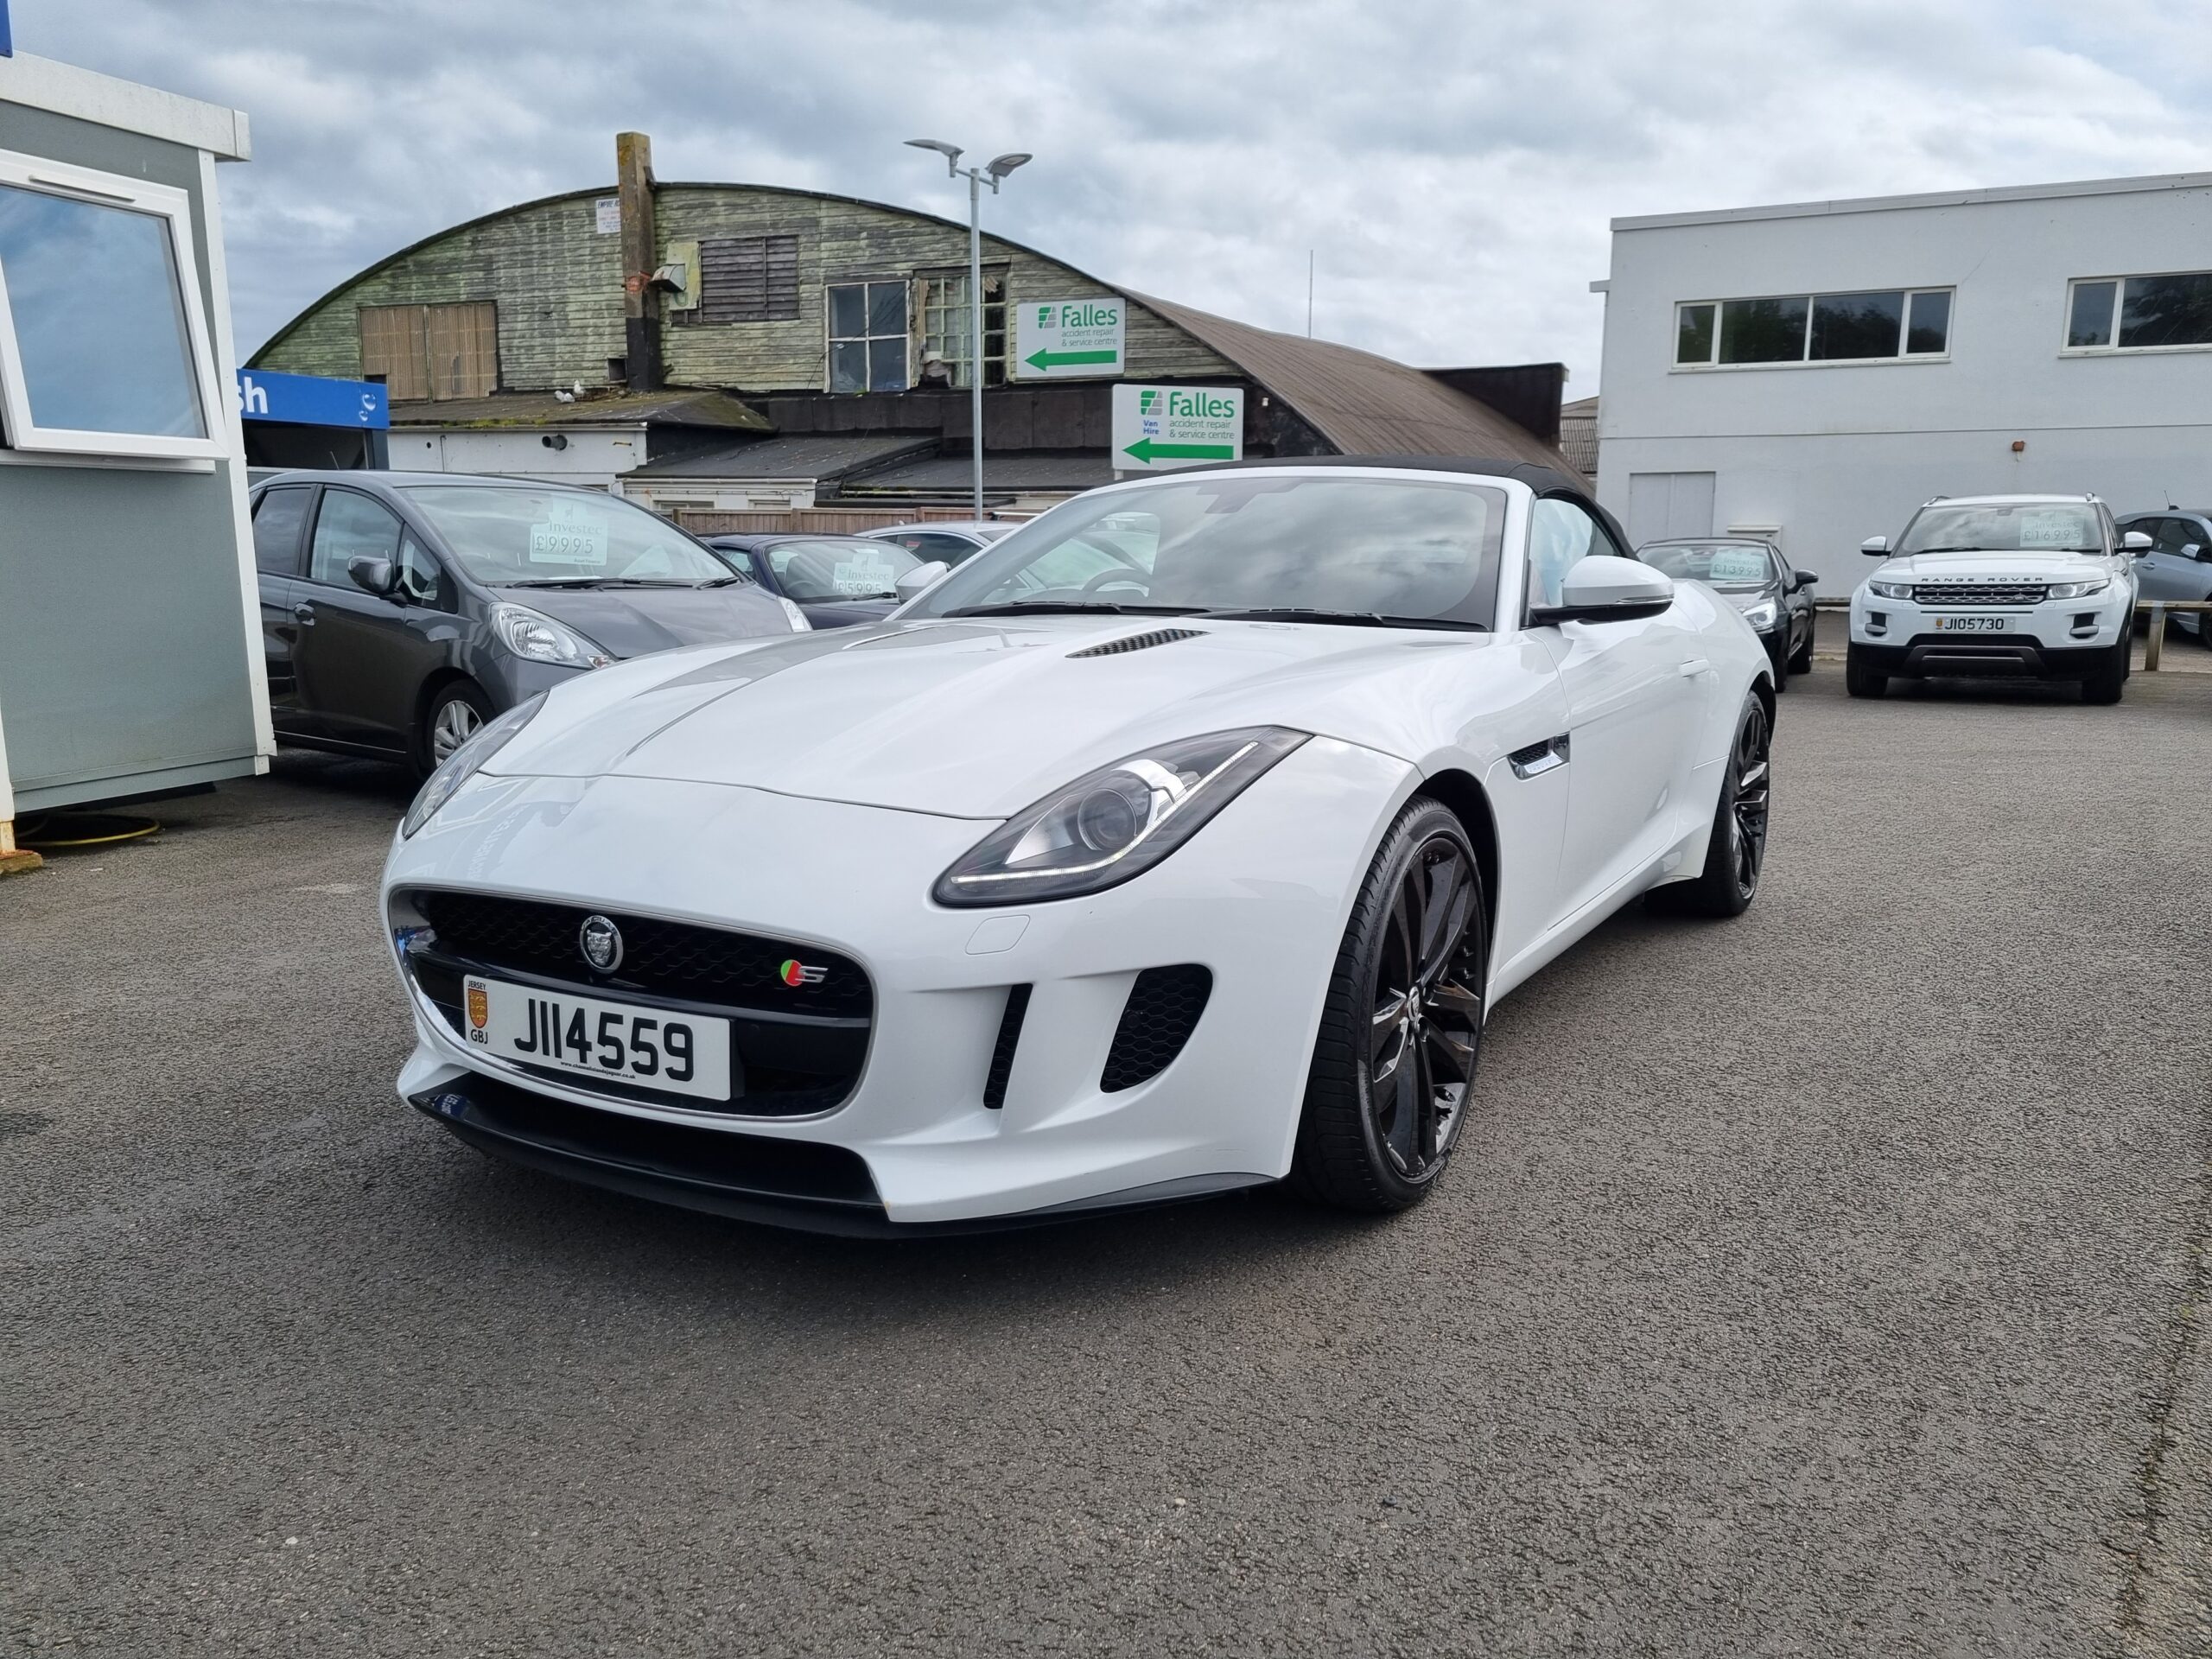 Reduced2014 Jaguar F Type S 30 V6 375bhp Quickshift Automatic Only 6300 Milesconvertiblevery Nice Examplenow Only 29995 11